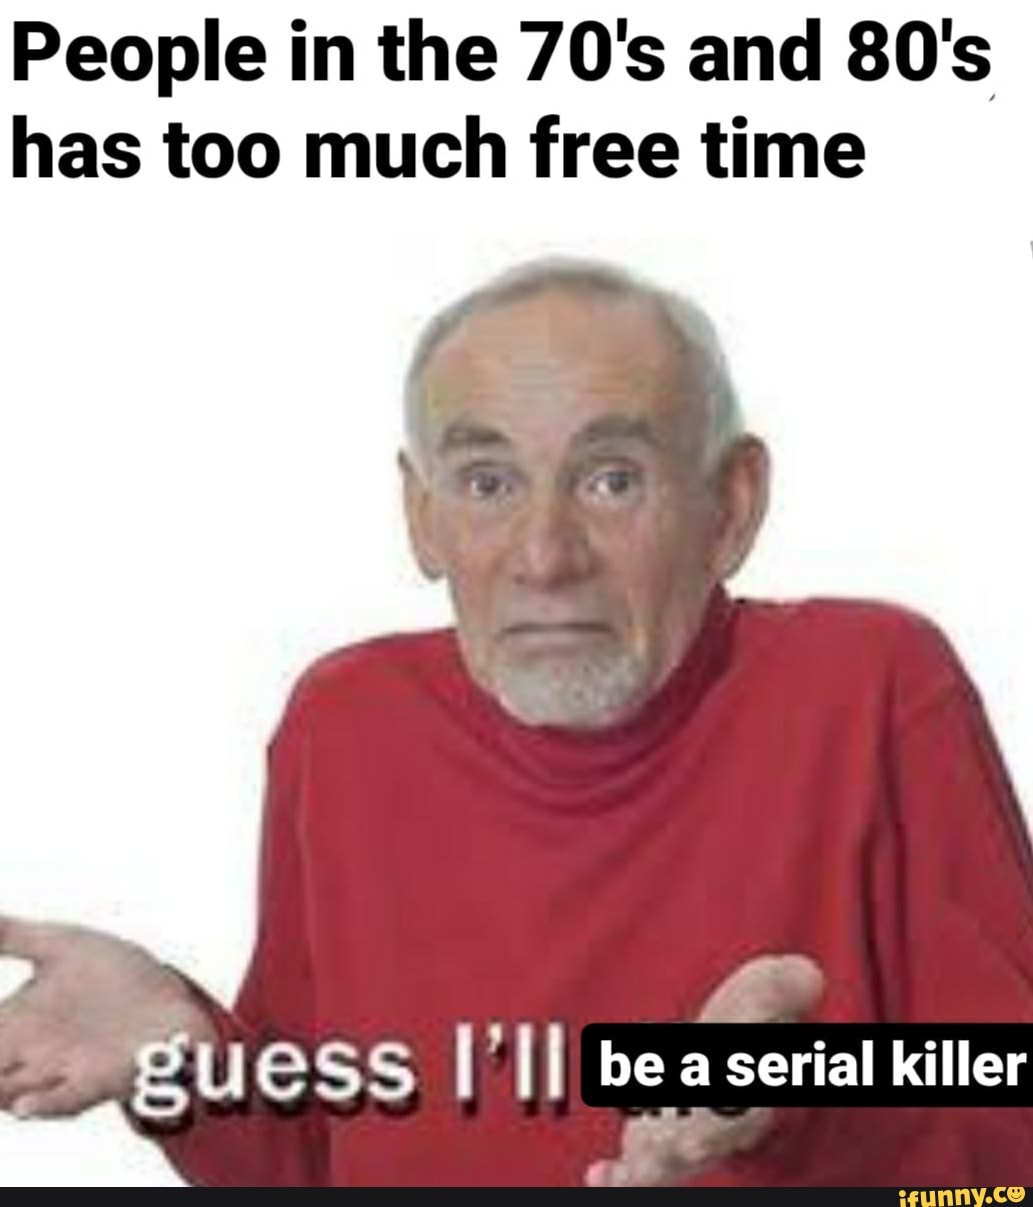 People in the 70's and 80's has too much free time II bea serial killer ...